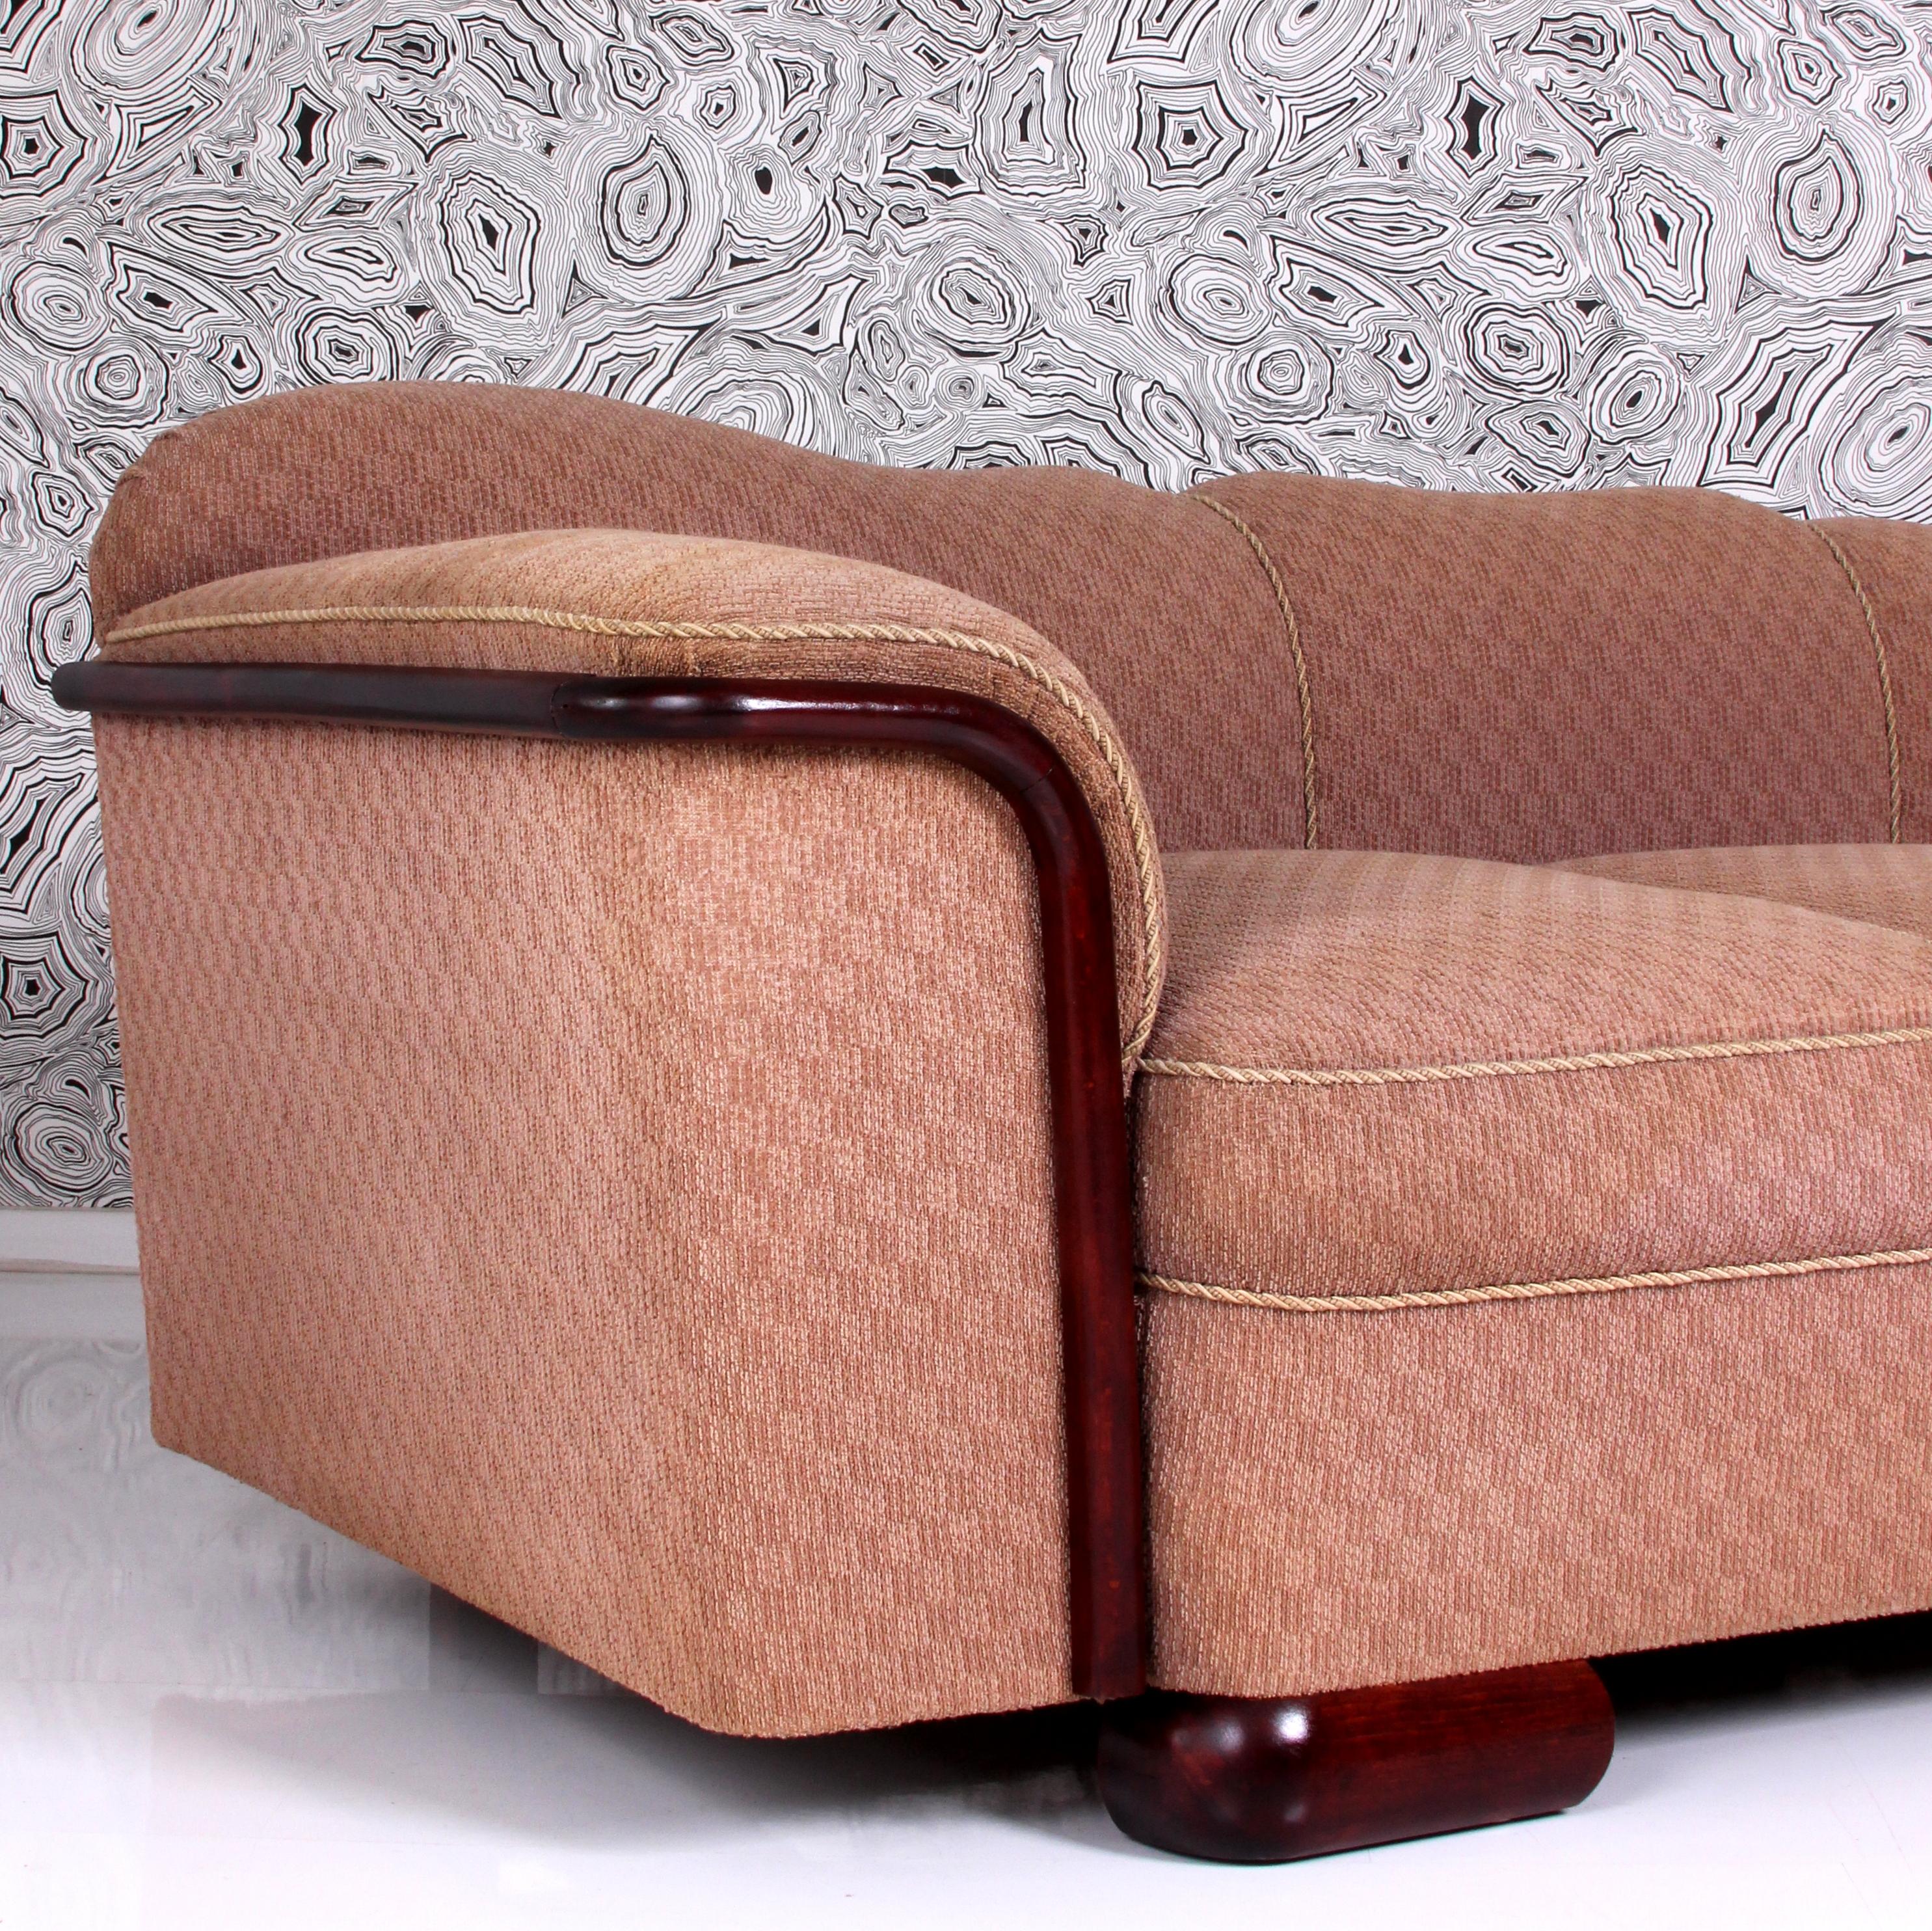 Mid-20th Century STRAIGHT classic art deco SOFA Dresden around 1930 or. fabric - wood refinished  For Sale